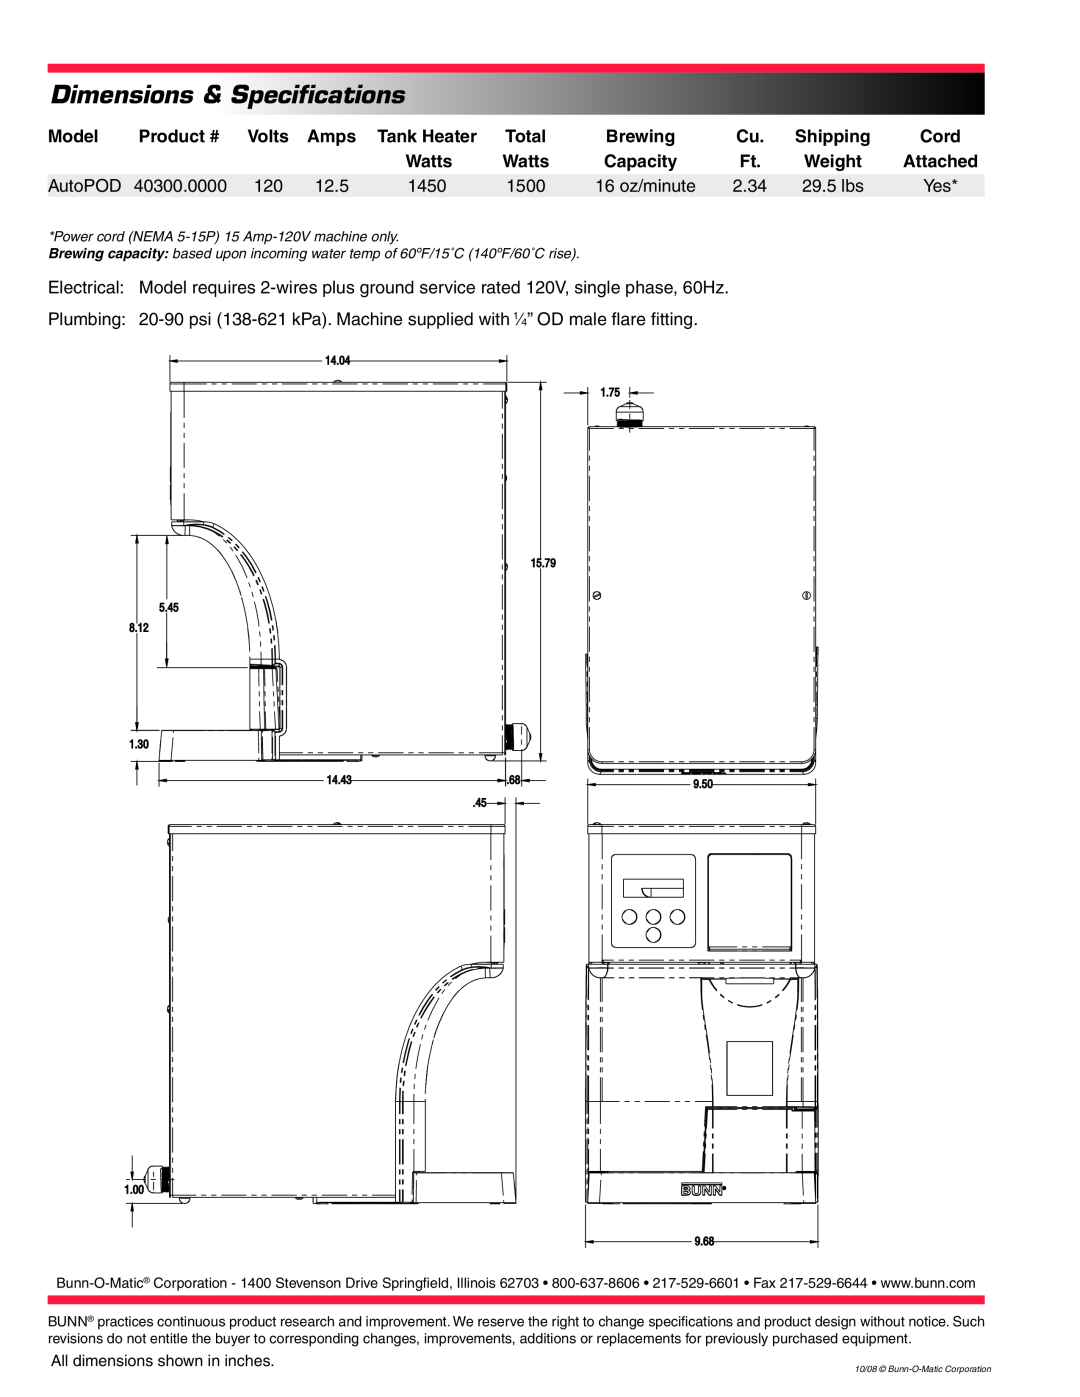 Bunn AutoPOD specifications Dimensions & Specifications 